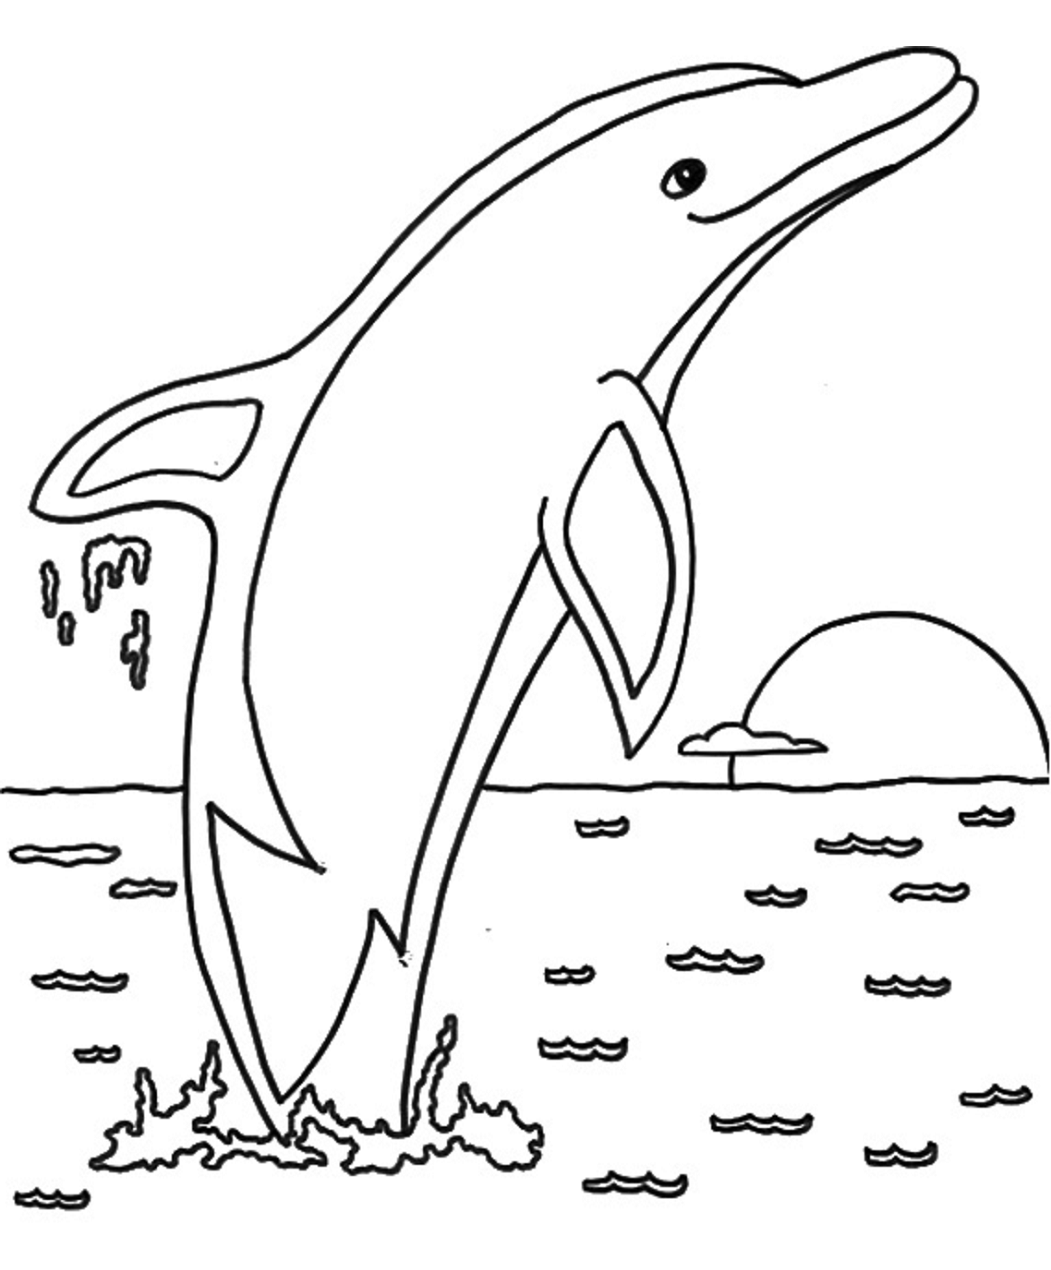 Dolphin Coloring Pages - Free Printable Coloring Pages for Kids